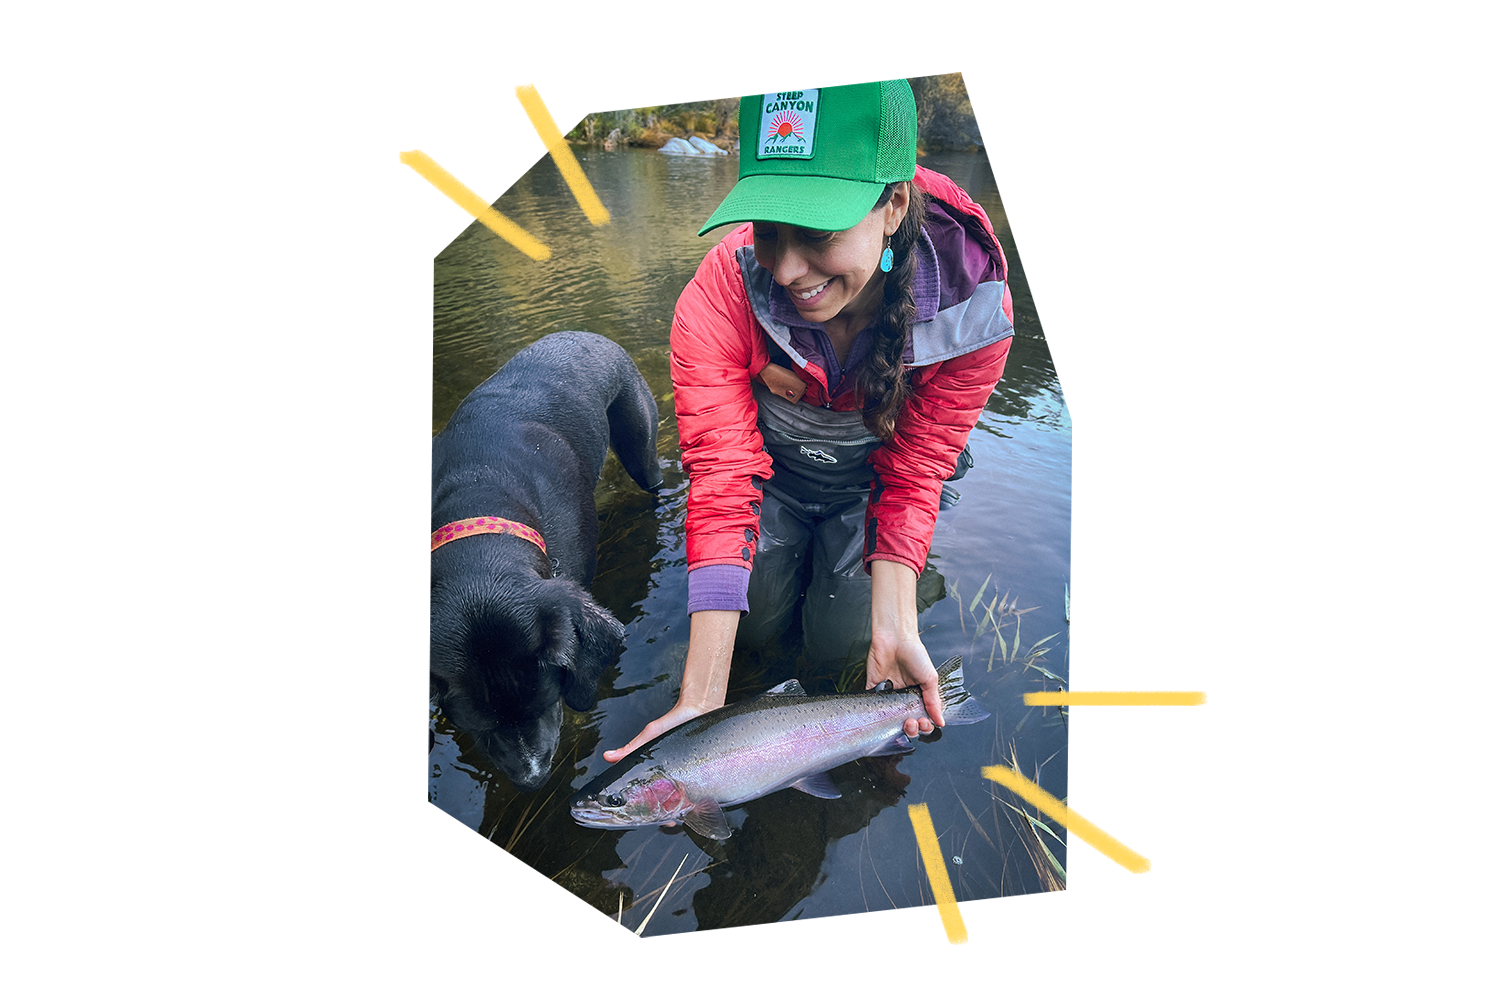 Katie holding fish above water's surface with dog beside her